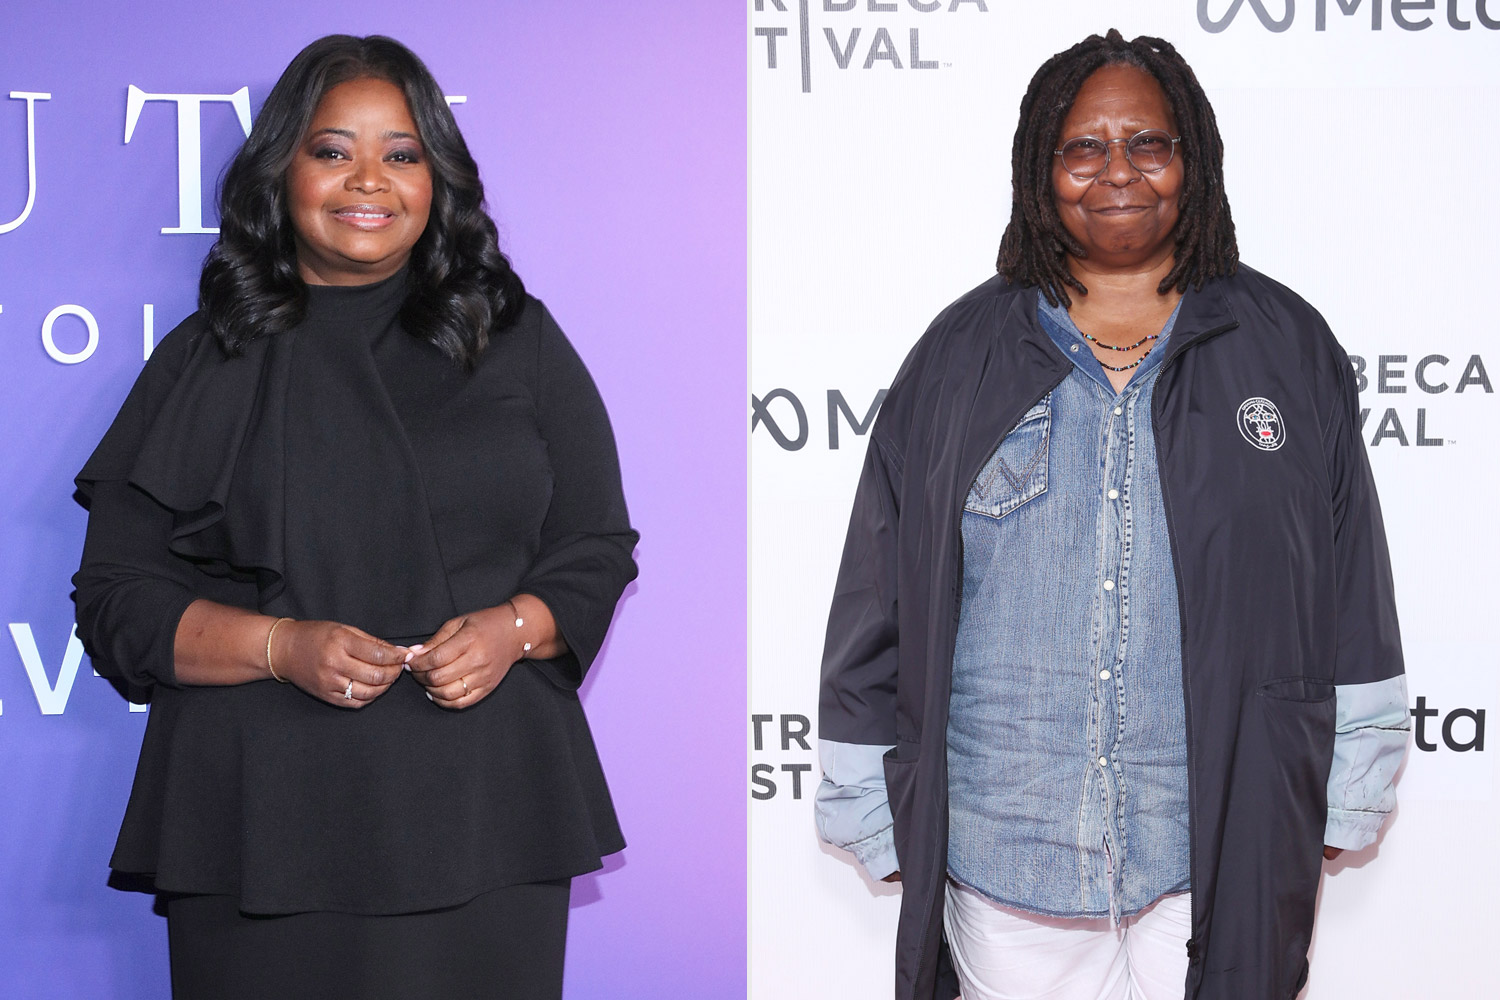 WEST HOLLYWOOD, CALIFORNIA - JANUARY 19: Octavia Spencer attends the Season 3 Premiere of Apple TV's "Truth be Told" at Pacific Design Center on January 19, 2023 in West Hollywood, California. (Photo by Robin L Marshall/FilmMagic); NEW YORK, NEW YORK - JUNE 12: Whoopi Goldberg attends Shorts: Animated Shorts Curated By Whoopi Goldberg during the 2022 Tribeca Festival at Village East Cinema on June 12, 2022 in New York City. (Photo by Rob Kim/Getty Images for Tribeca Festival)